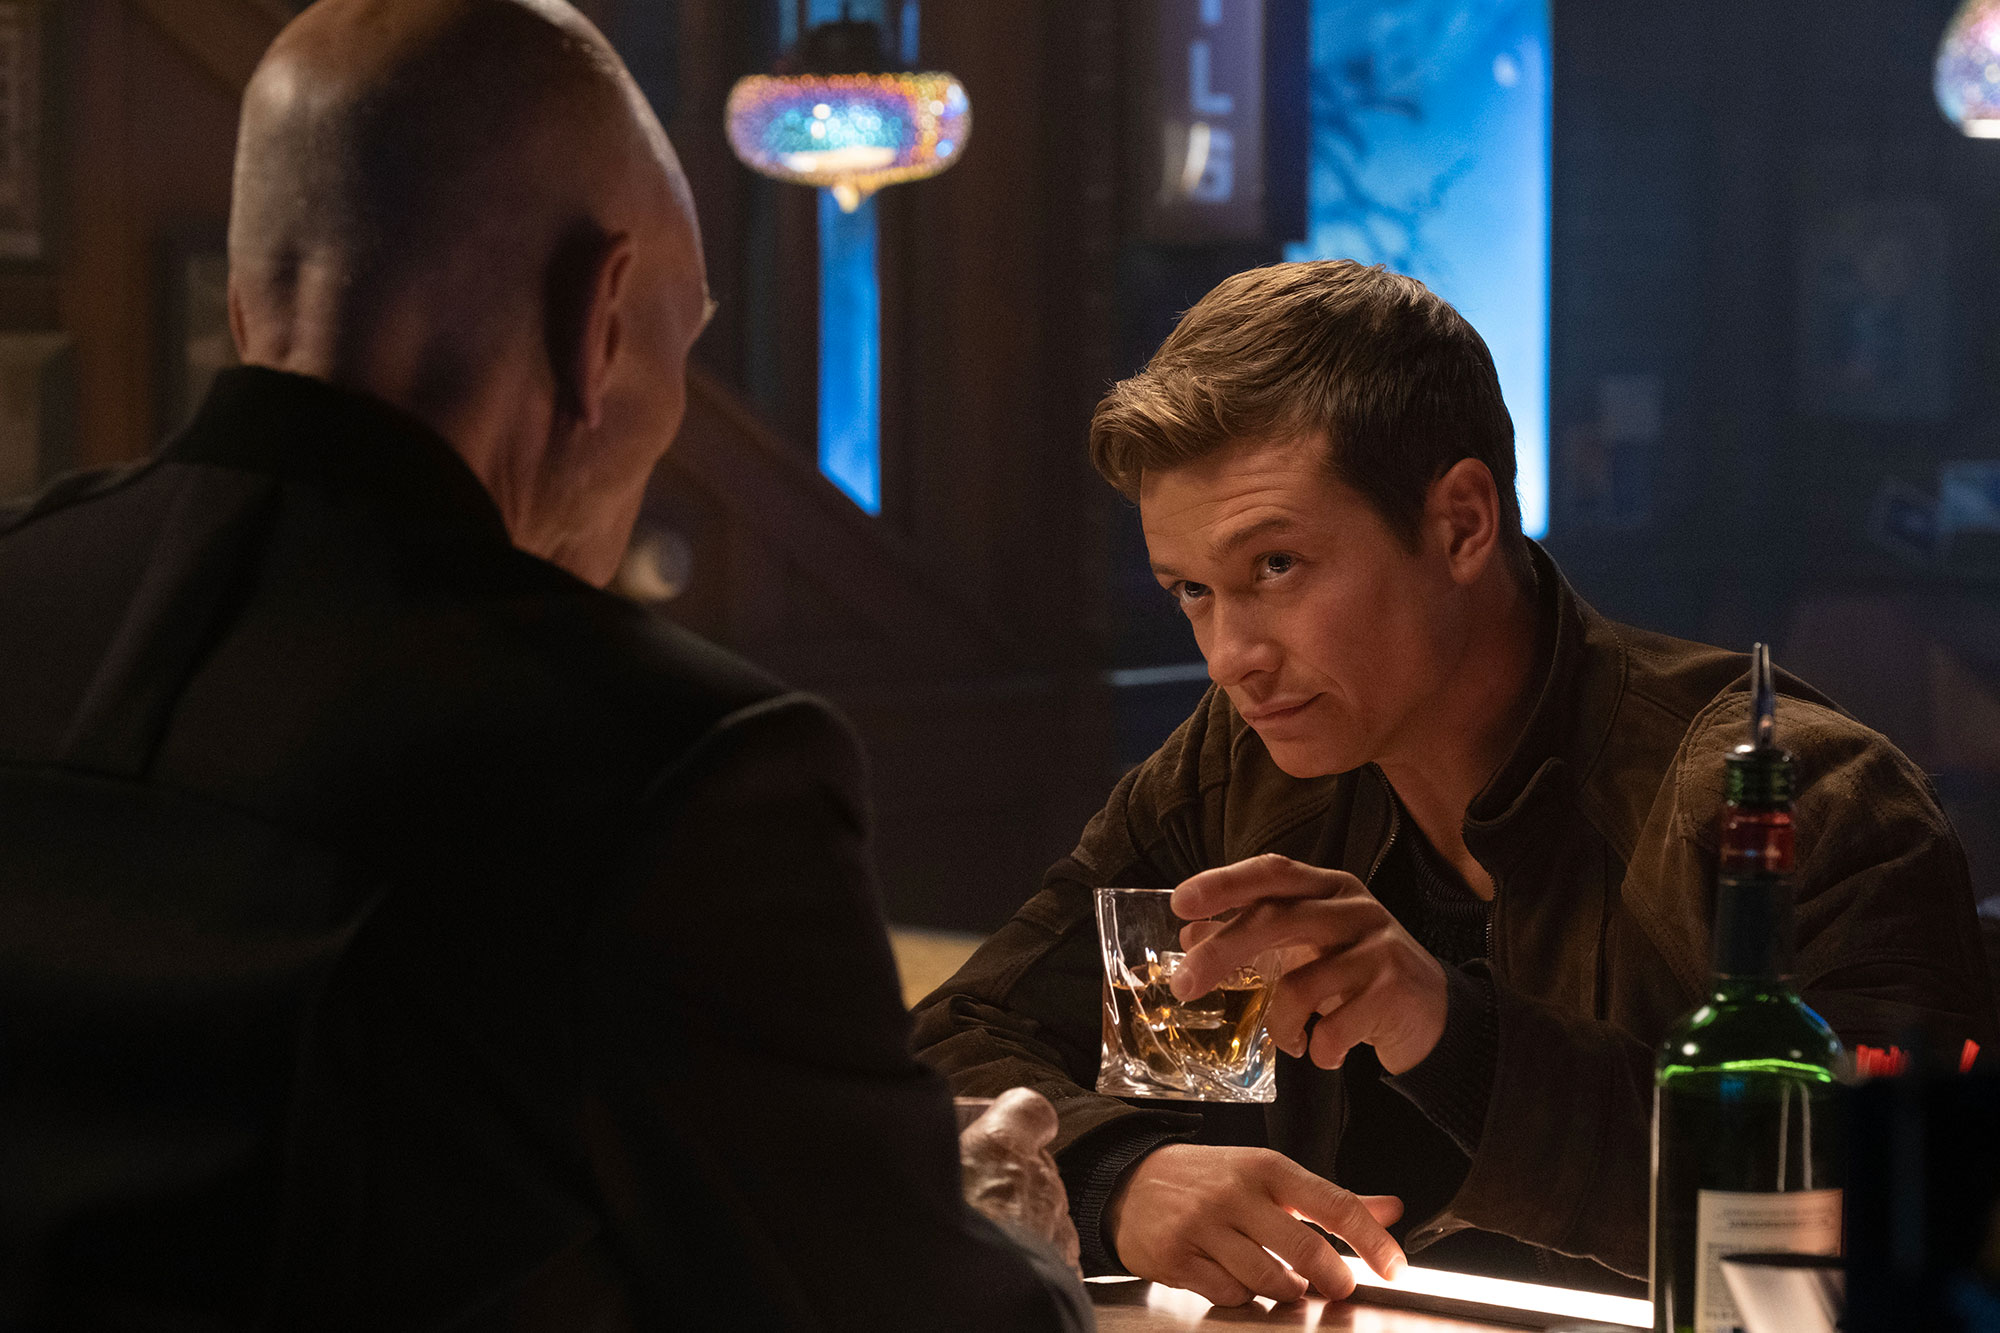 Image of Ed Speleers as Jack Crusher on 'Star Trek: Picard.' He is standing opposite Patrick Stewart as Jean-Luc Picard, who has his back to the camera. Jack is sitting at a bar holding up a glass of whiskey. He has short, light brown hair and is wearing a brown jacket. Jean-Luc is bald and wearing all black. 